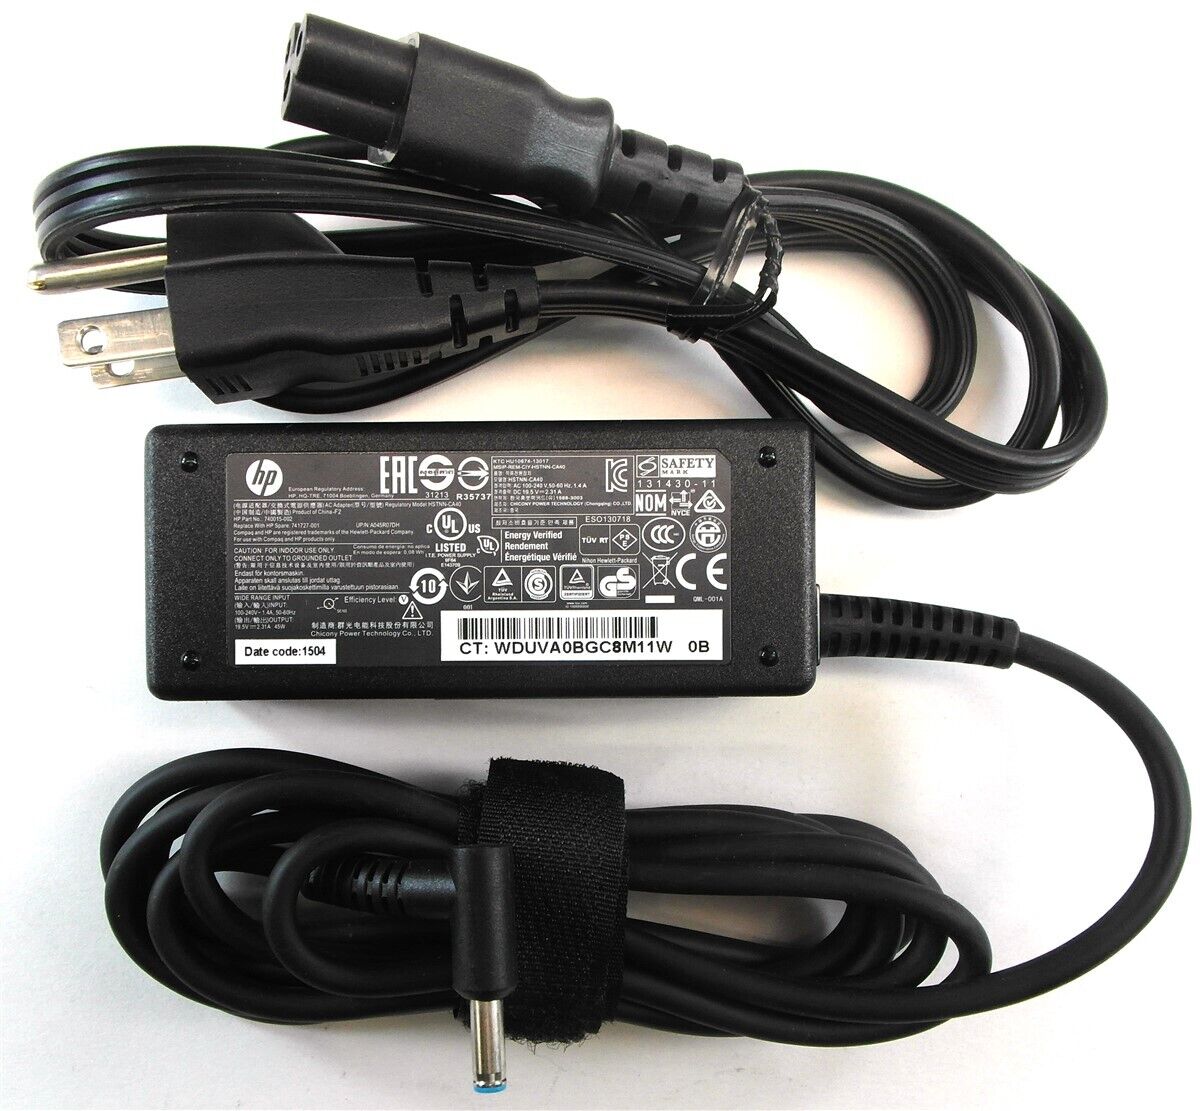 Genuine HP Laptop Charger Adapter Power Supply 740015-002 740015-003 741727-001 HP 740015-001, 740015-002, 740015-003, 740015-004, 741727-001, 854054-001, 854054-002, 854054-003, 854054-004, 854054-005